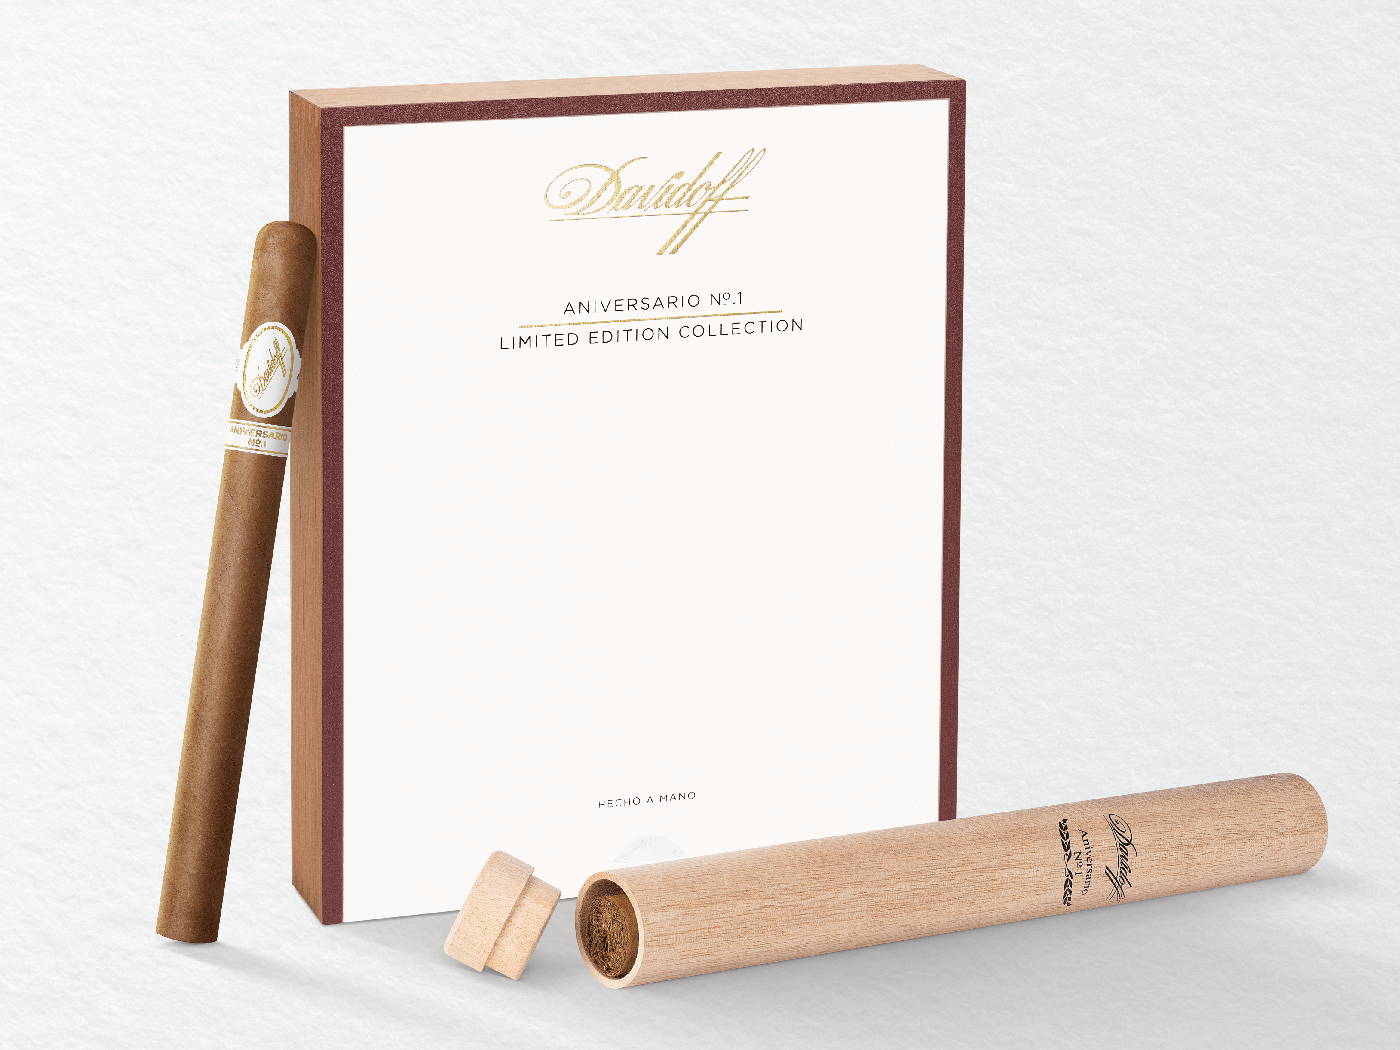 Aniversario No. 1 Limited Edition Collection single cigar placed next to it and wooden tubo in front of it. 